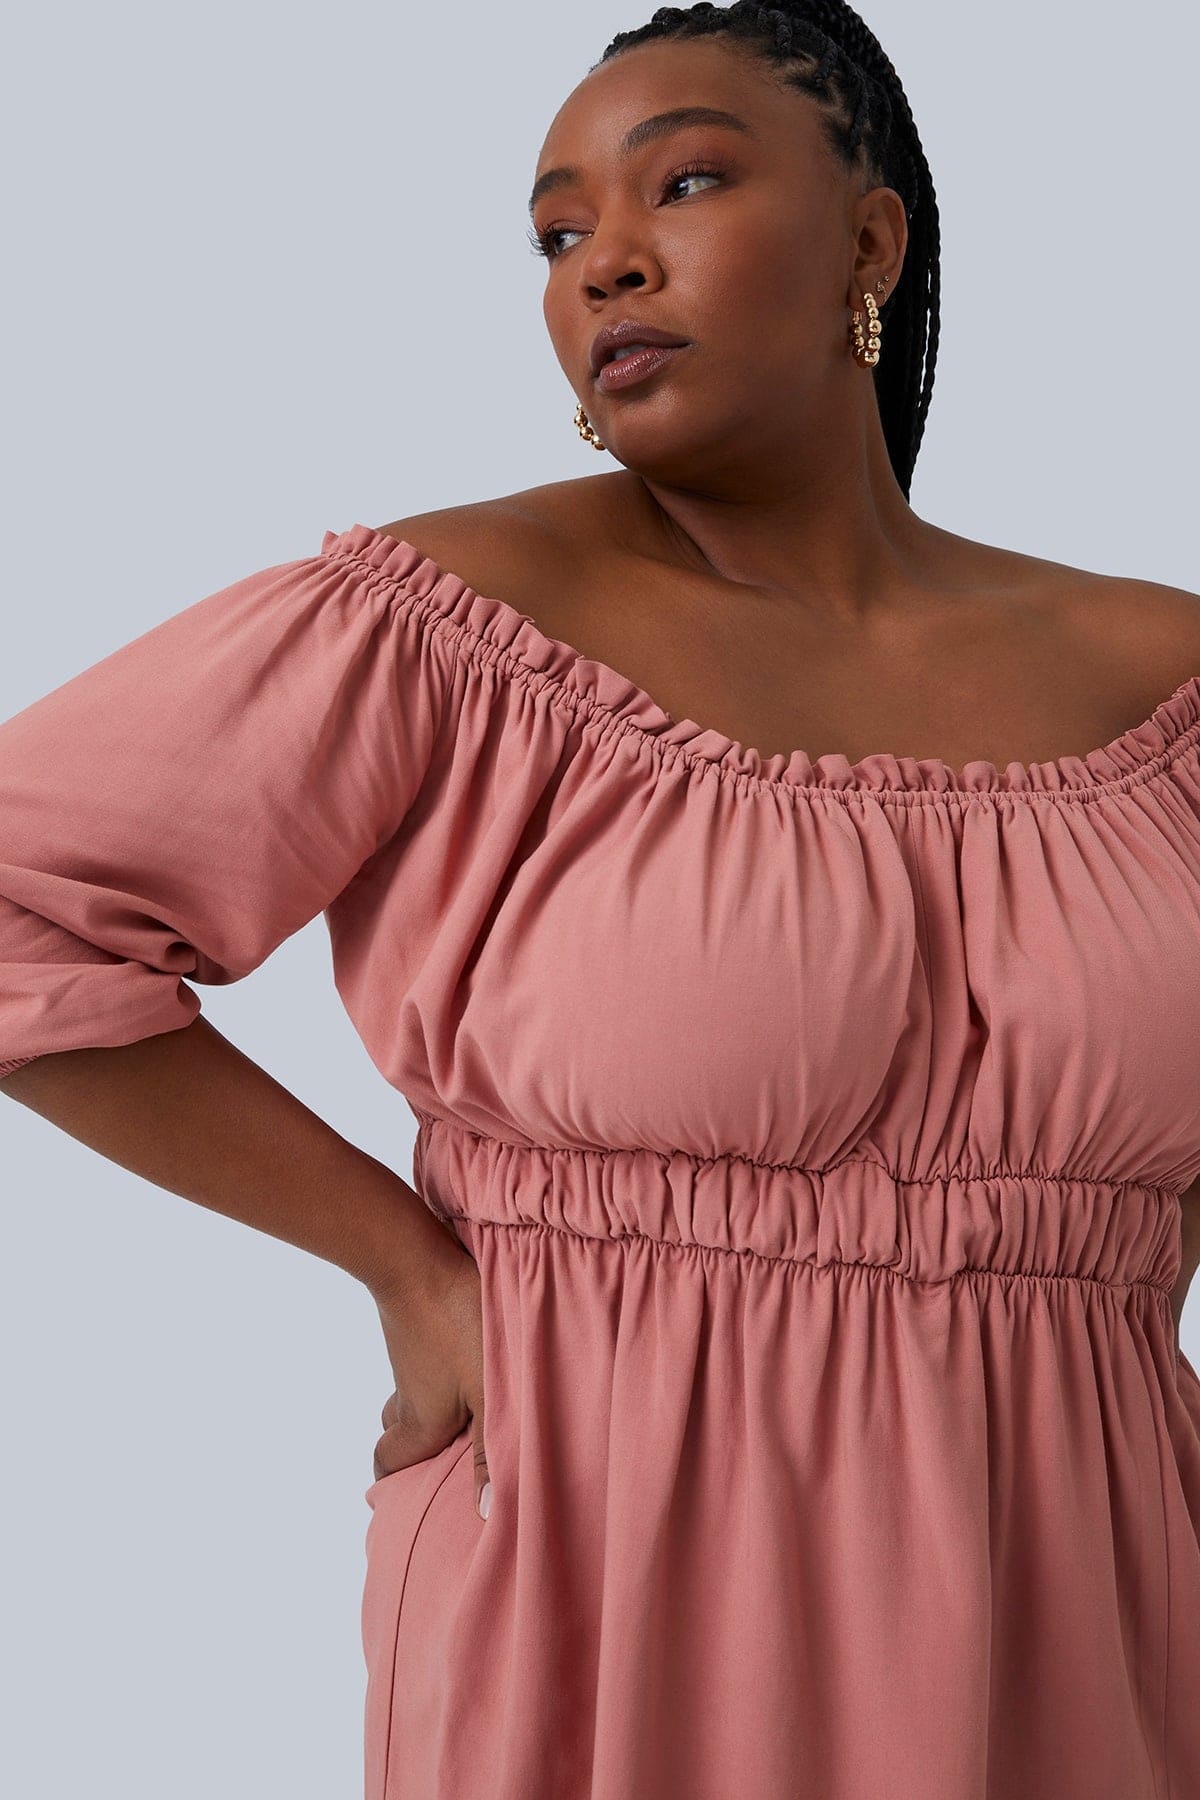 Close up shoulder shot of the Gianna Mini Dress. Model's shoulders are shrugged with hands on hips looking to the side. Sleeves are right below the elbow, color blush and size 1X. Shop Gia IRL Plus Size Boutique.